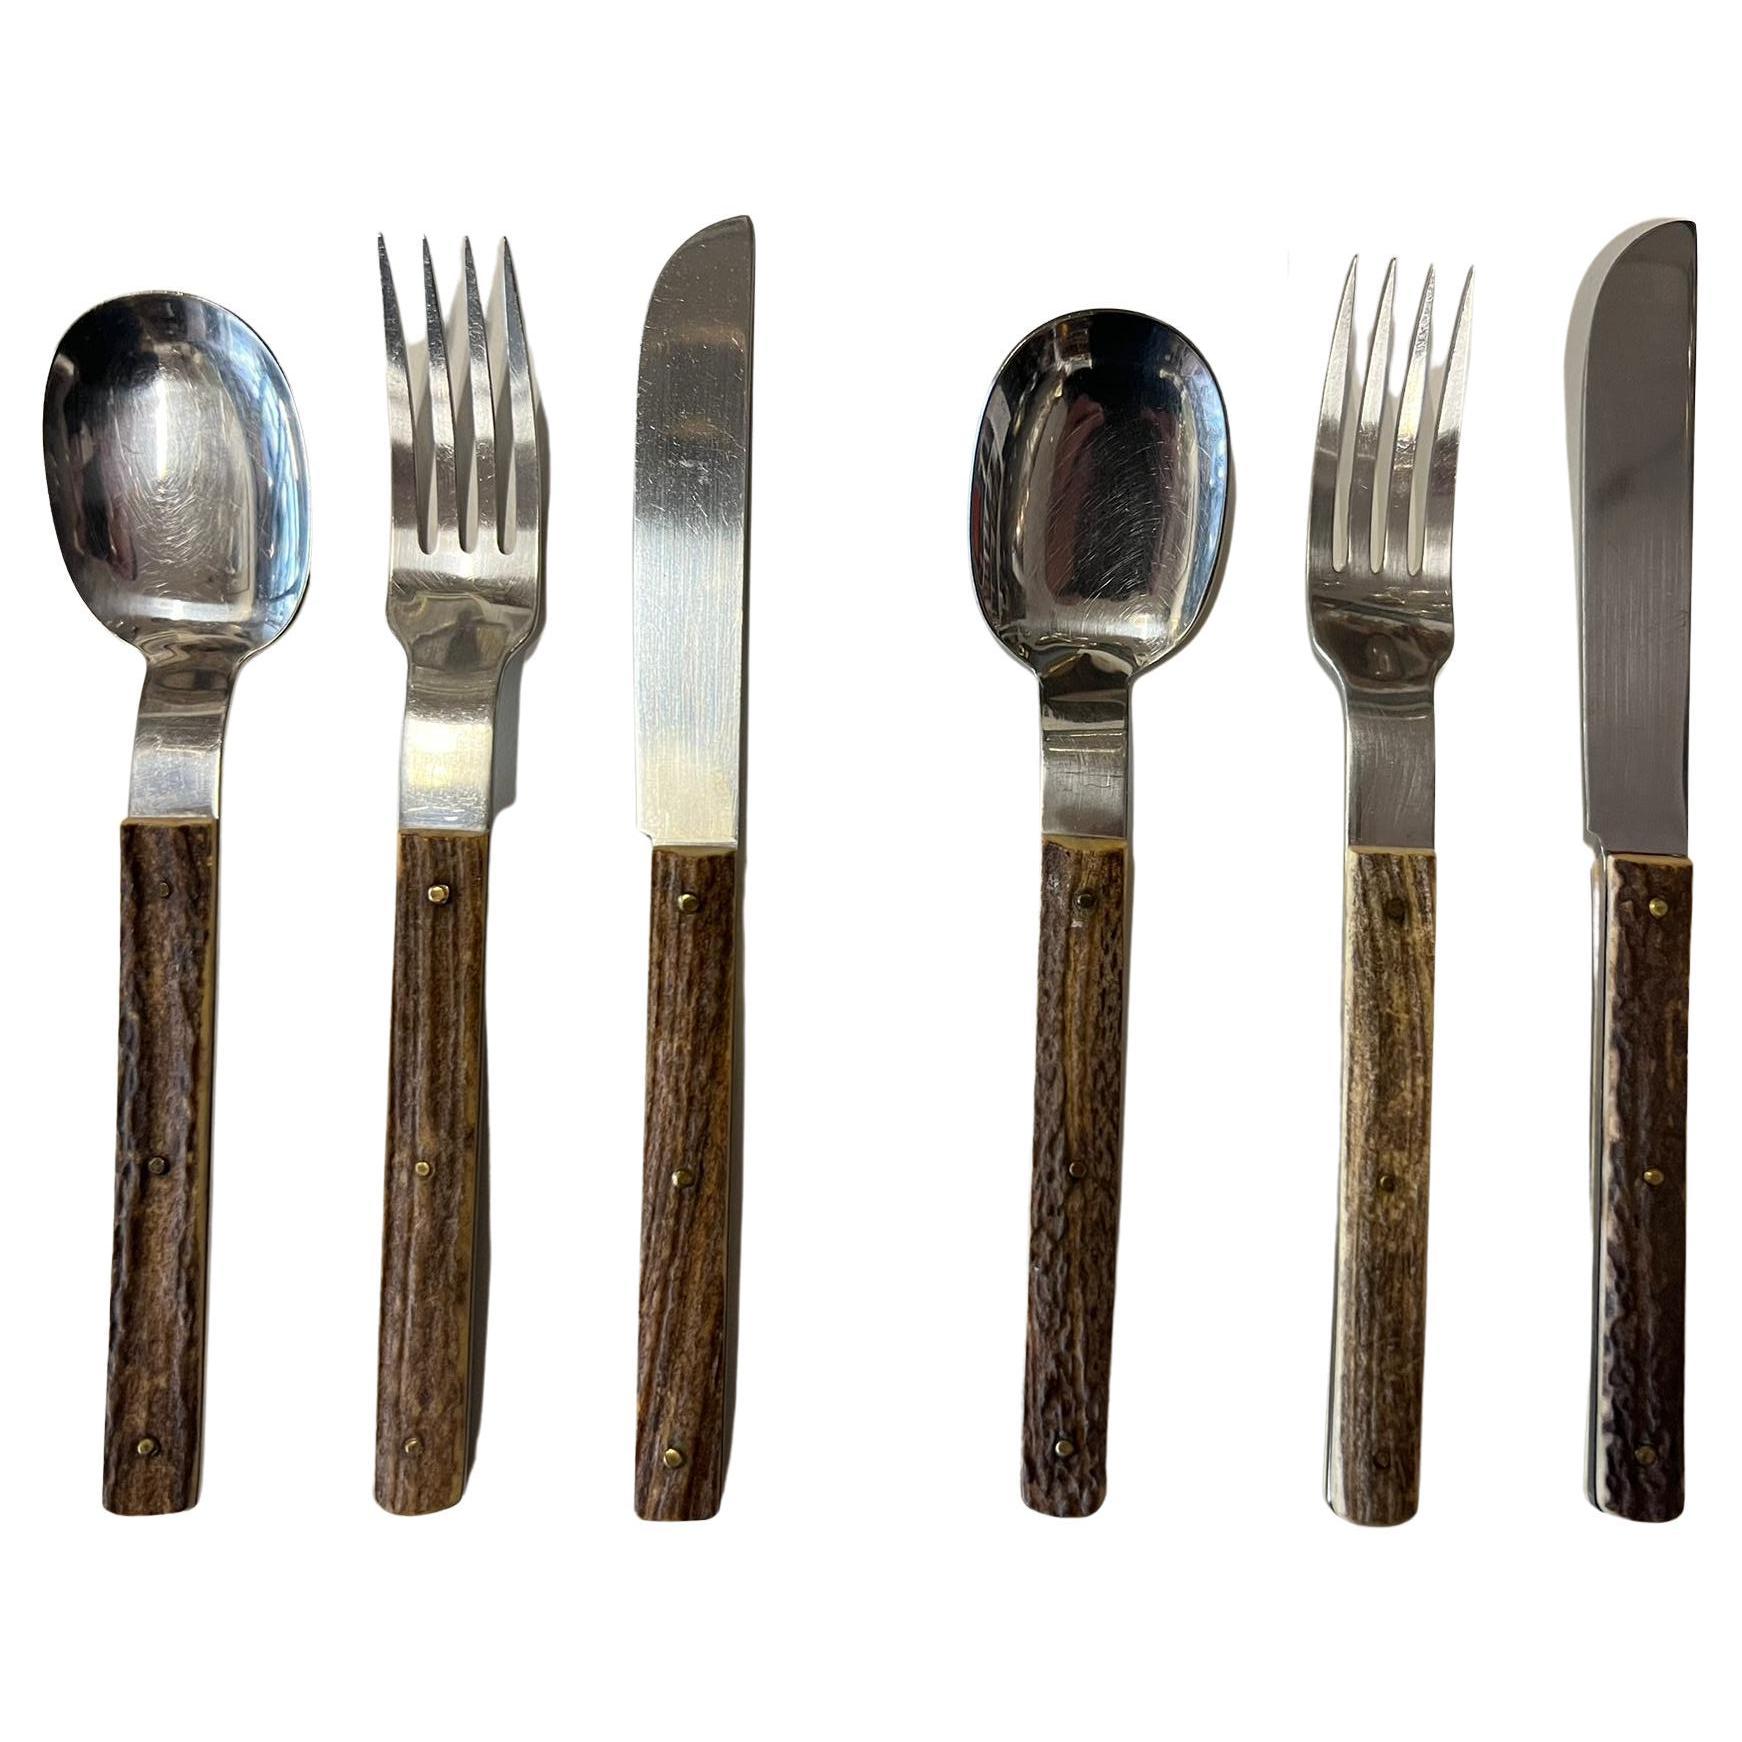 Amboss cutlery with antler handles Austria, 1960s 
Set of 6 for two, good original condition.